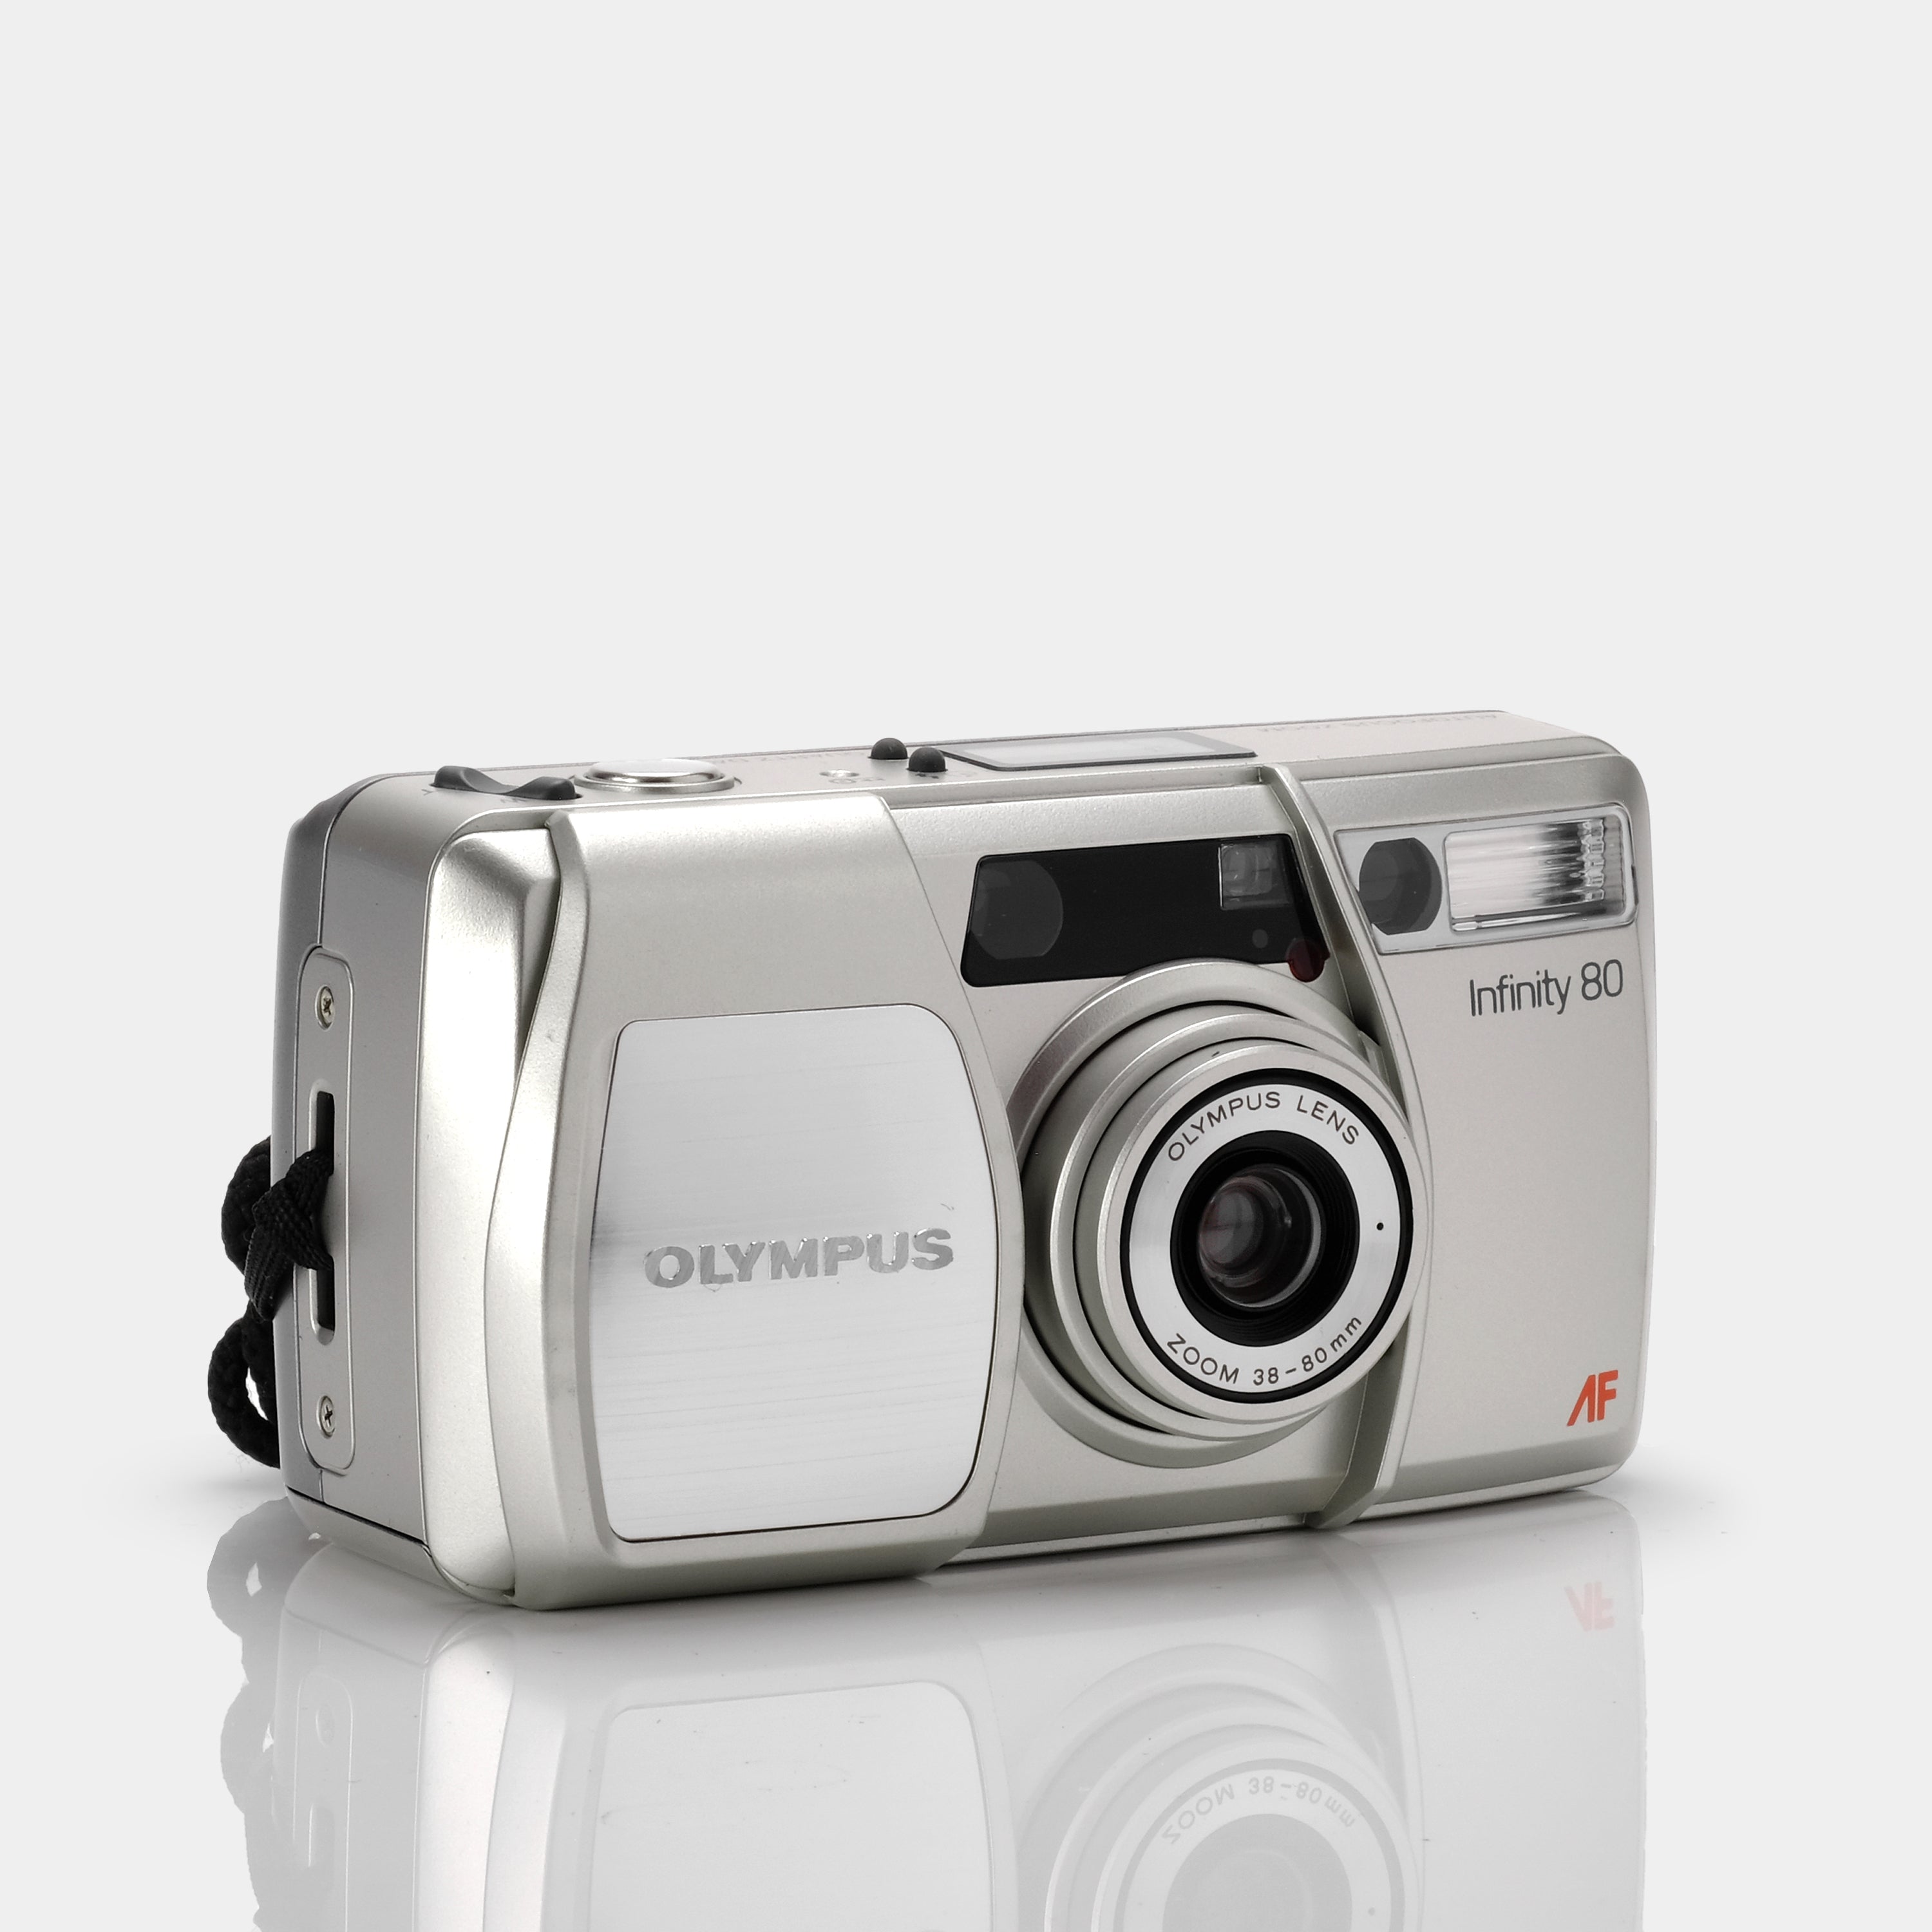 Olympus ∞ Infinity 80 35mm Point and Shoot Film Camera